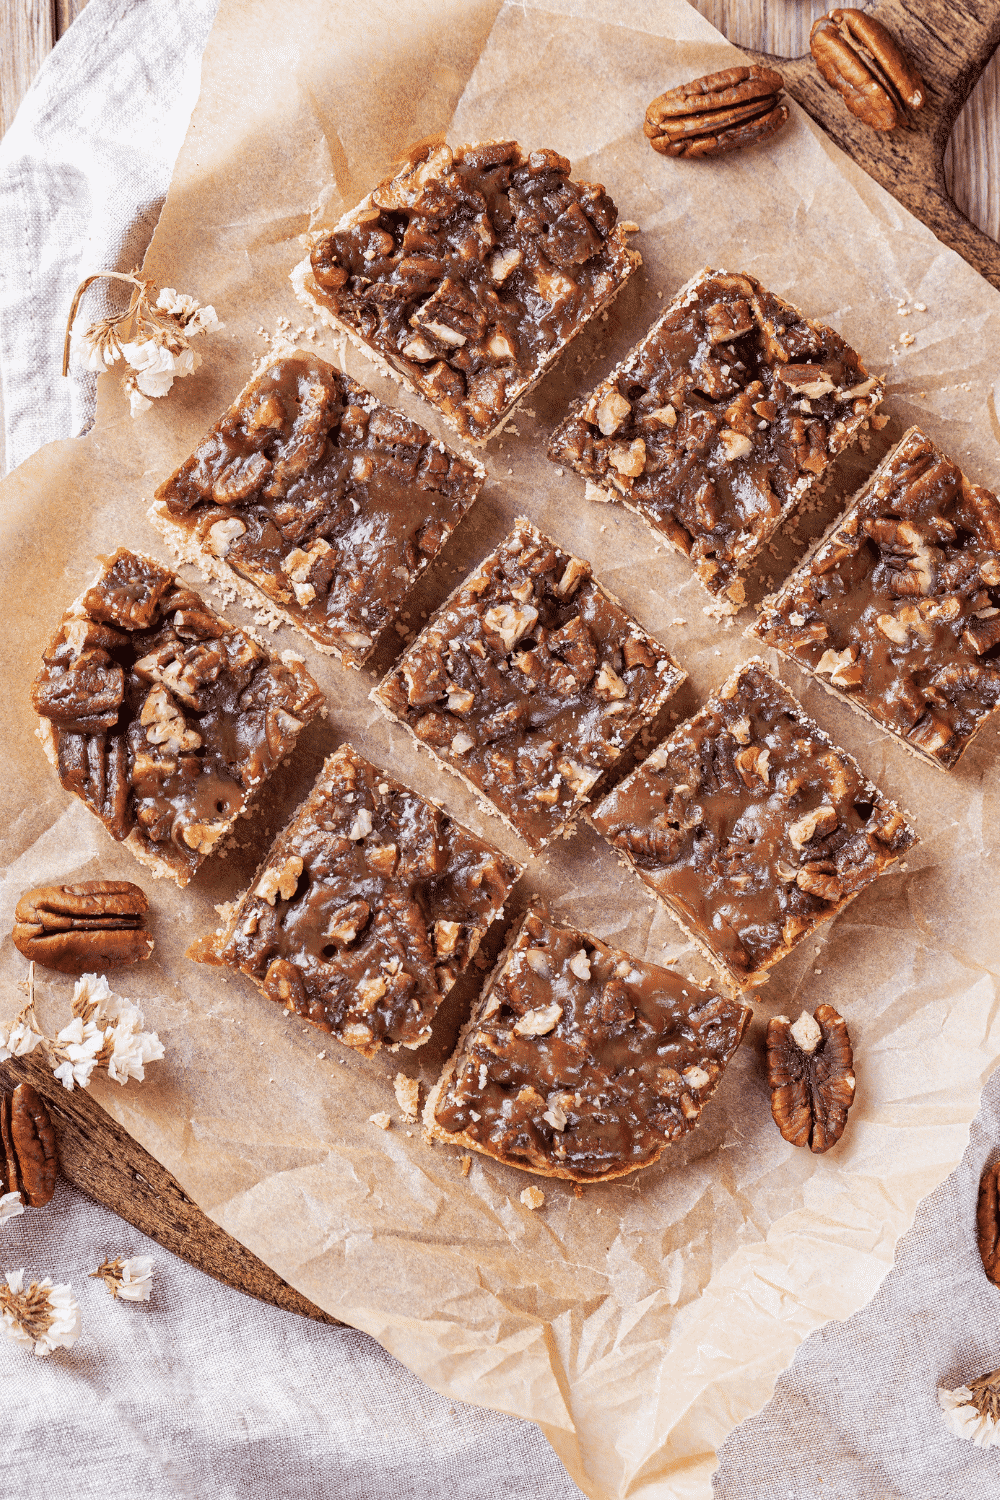 Three rows of three pecan pie bars on a piece of parchment paper on a wooden cutting board.